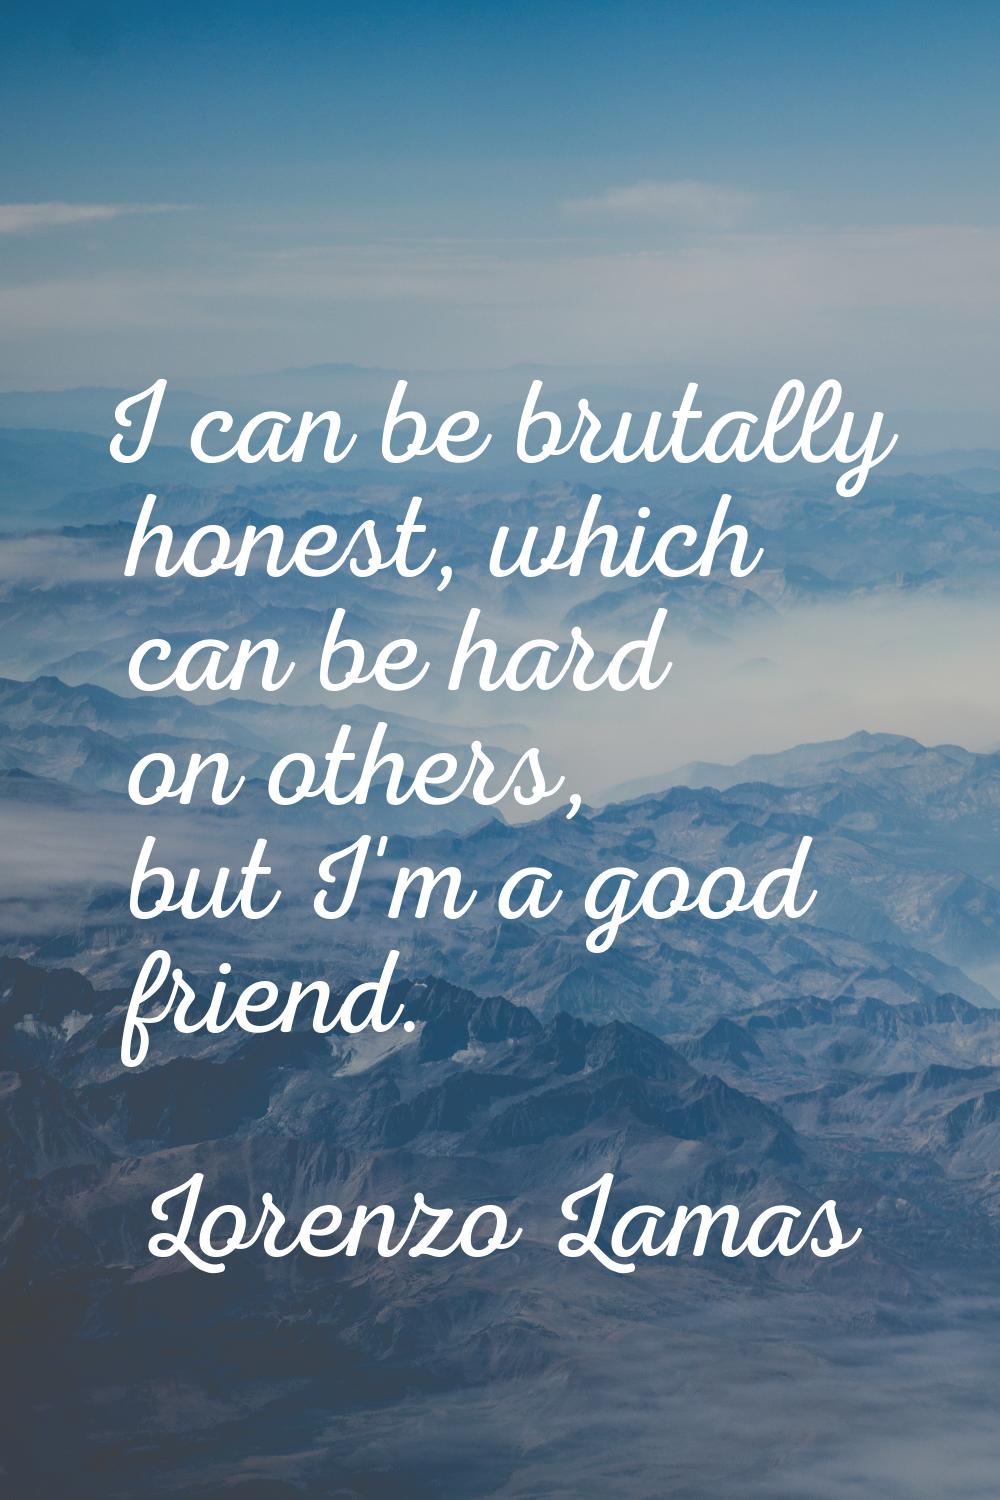 I can be brutally honest, which can be hard on others, but I'm a good friend.